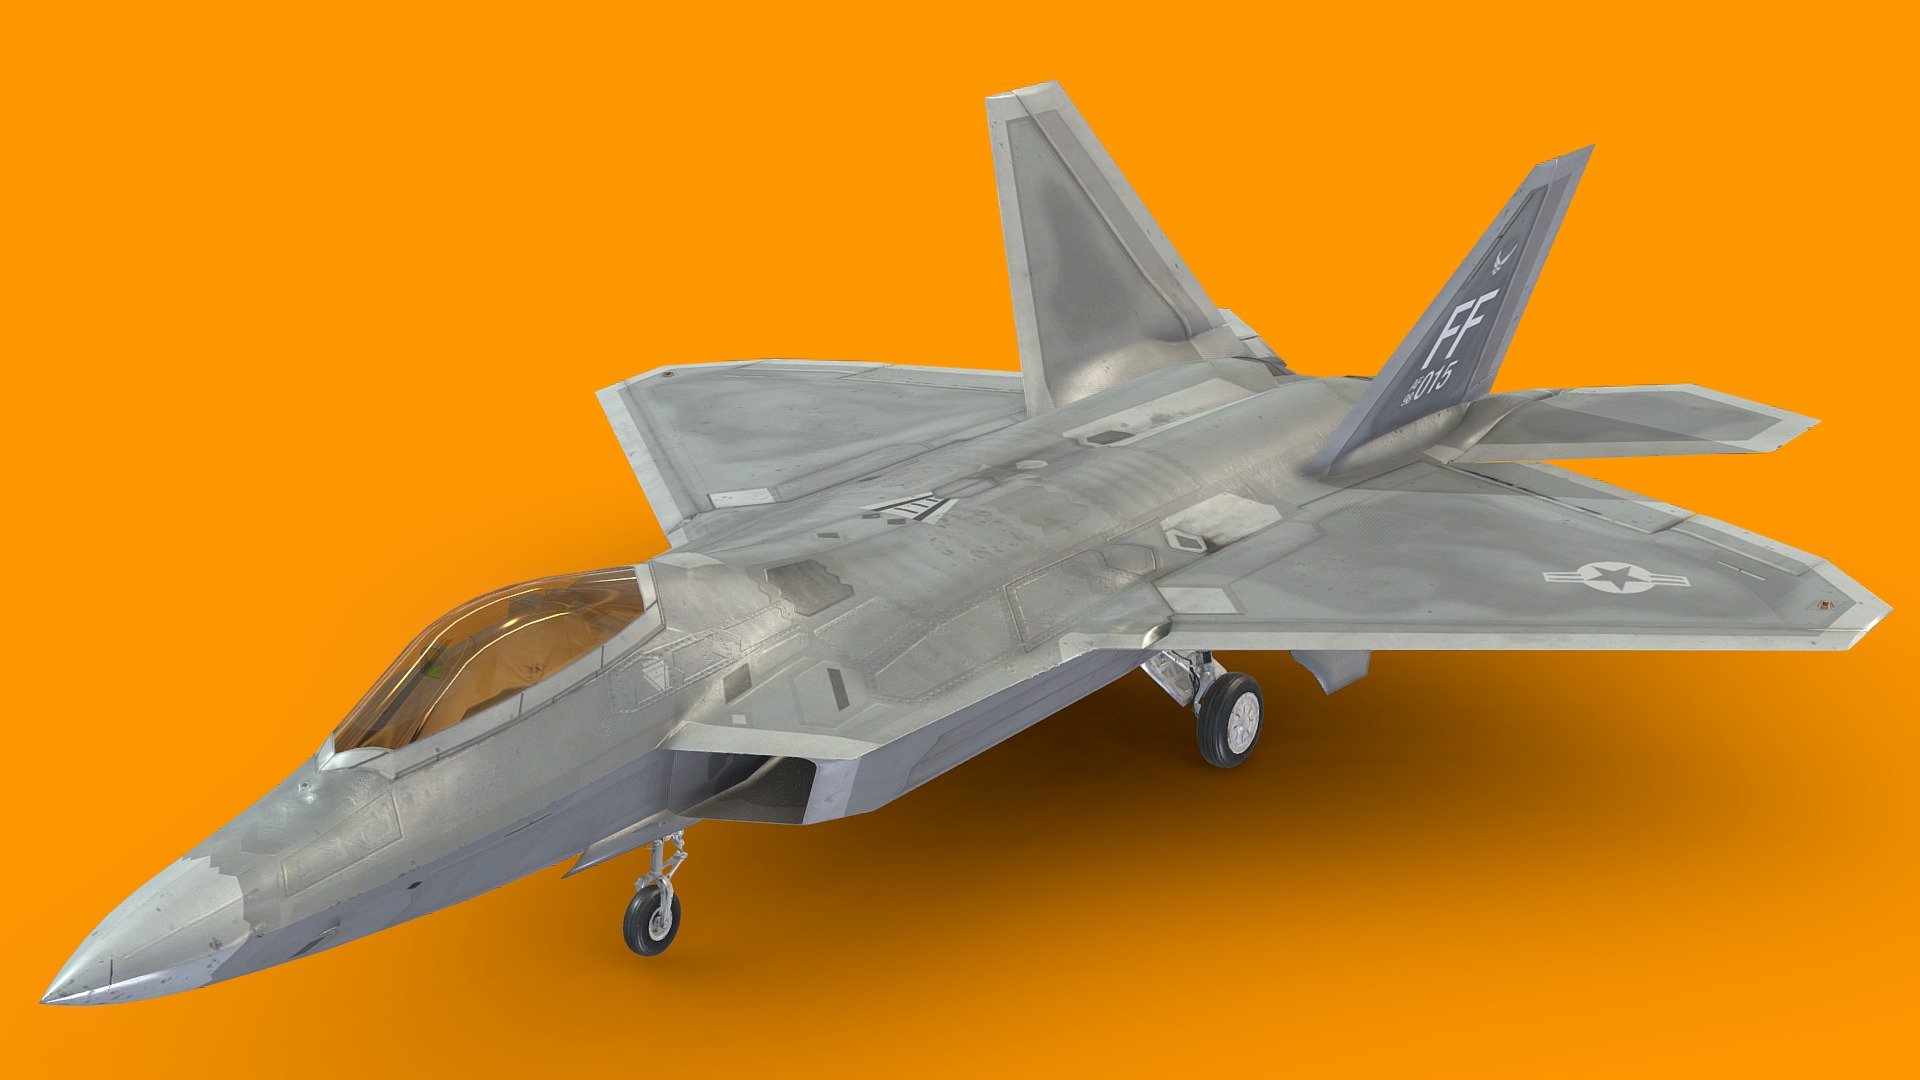 Updated version with texture adjustments to make it look more realistic.

The Lockheed Martin F-22 Raptor is an American single-seat, twin-engine, supersonic all-weather tactical stealth fighter aircraft developed for the United States Air Force (USAF).

The aircraft was designed as an air superiority fighter, but also incorporates ground attack, electronic warfare, and signals intelligence capabilities.

The aircraft first flew in 1997 and was variously designated F-22 and F/A-22 before it formally entered service in December 2005 as the F-22A. The program was cut to 187 production aircraft in 2009 due to high costs and the development of the more affordable and versatile F-35.

The fighter’s combination of stealth, aerodynamic performance, and mission systems enabled a leap in air combat capabilities and set the benchmark for its generation.

Render:
 - F-22 Raptor (Updated) - Fighter Jet - Free - Download Free 3D model by bohmerang 3d model